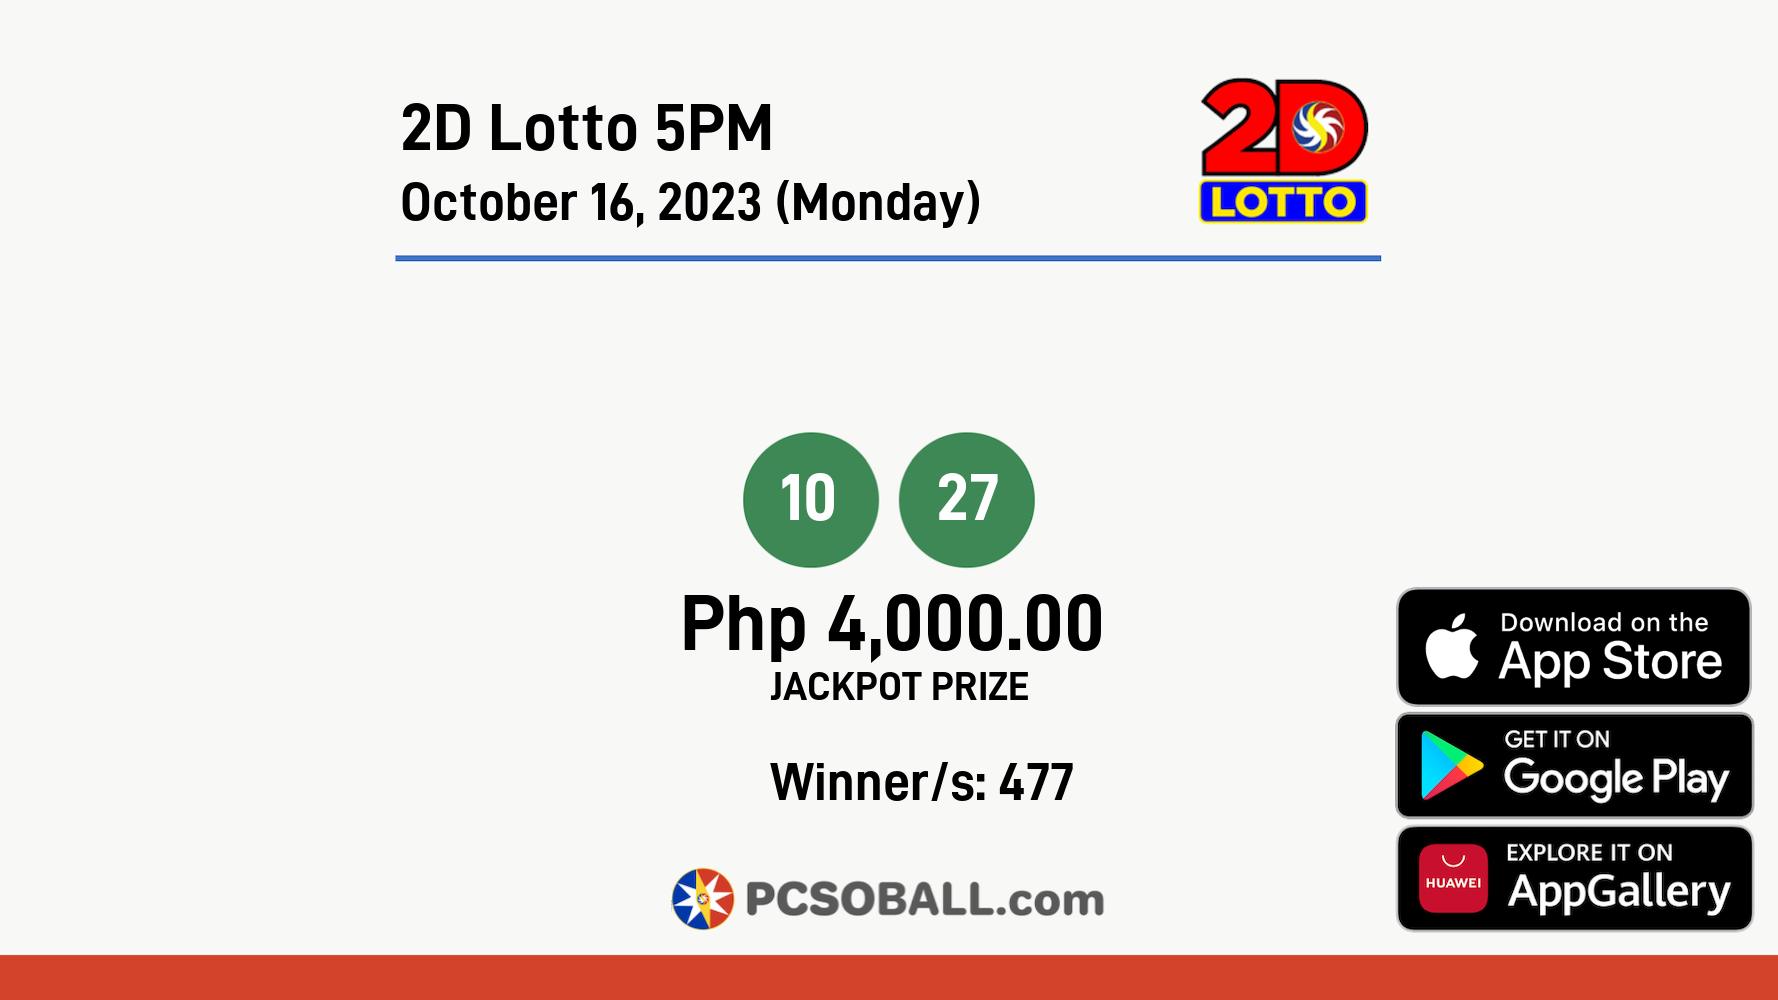 2D Lotto 5PM October 16, 2023 (Monday) Result